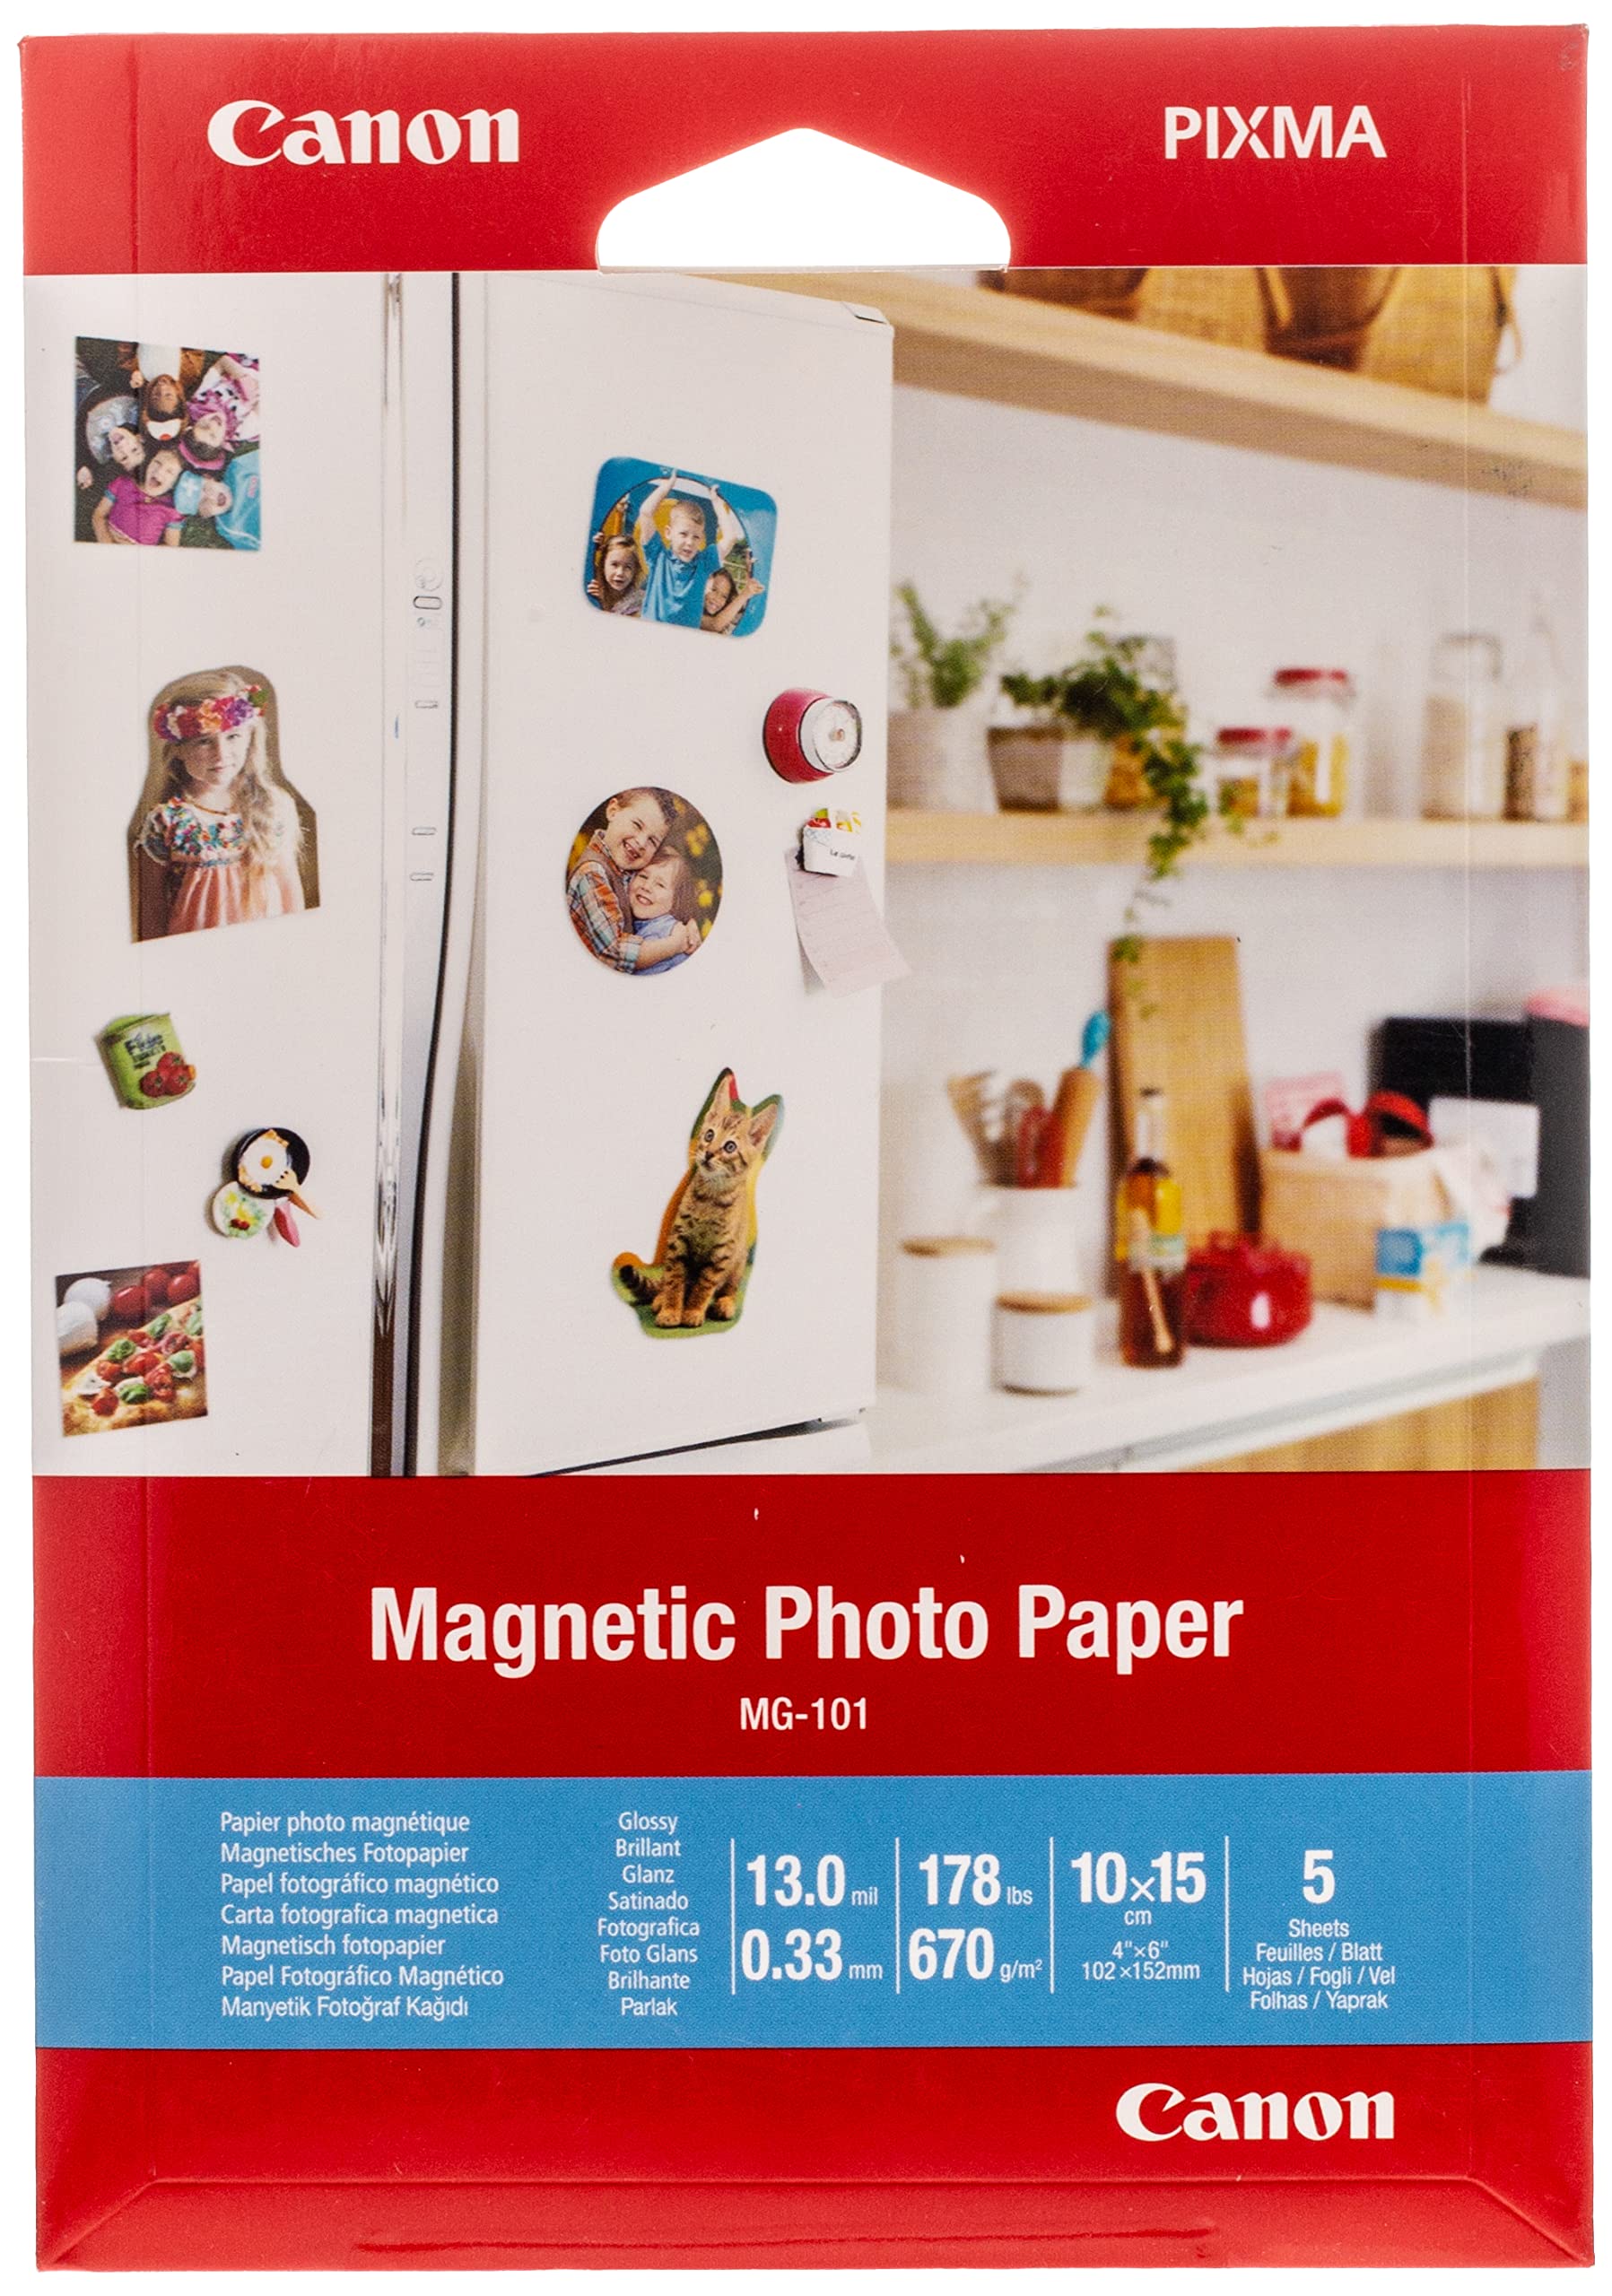 Magnetic Photo Paper Mg 101 4x6 50f Canon 3634c002 4549292137583